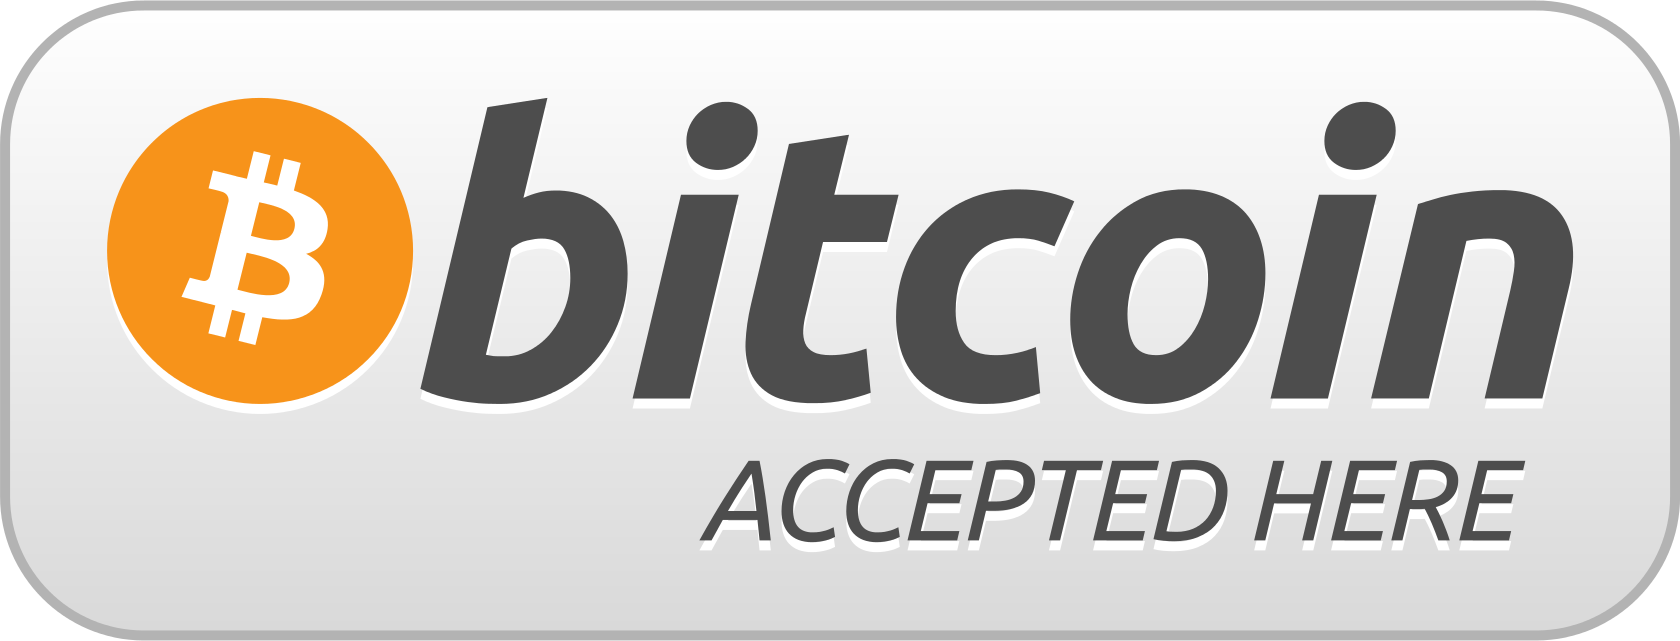 Bitcoin_accepted_here_printable